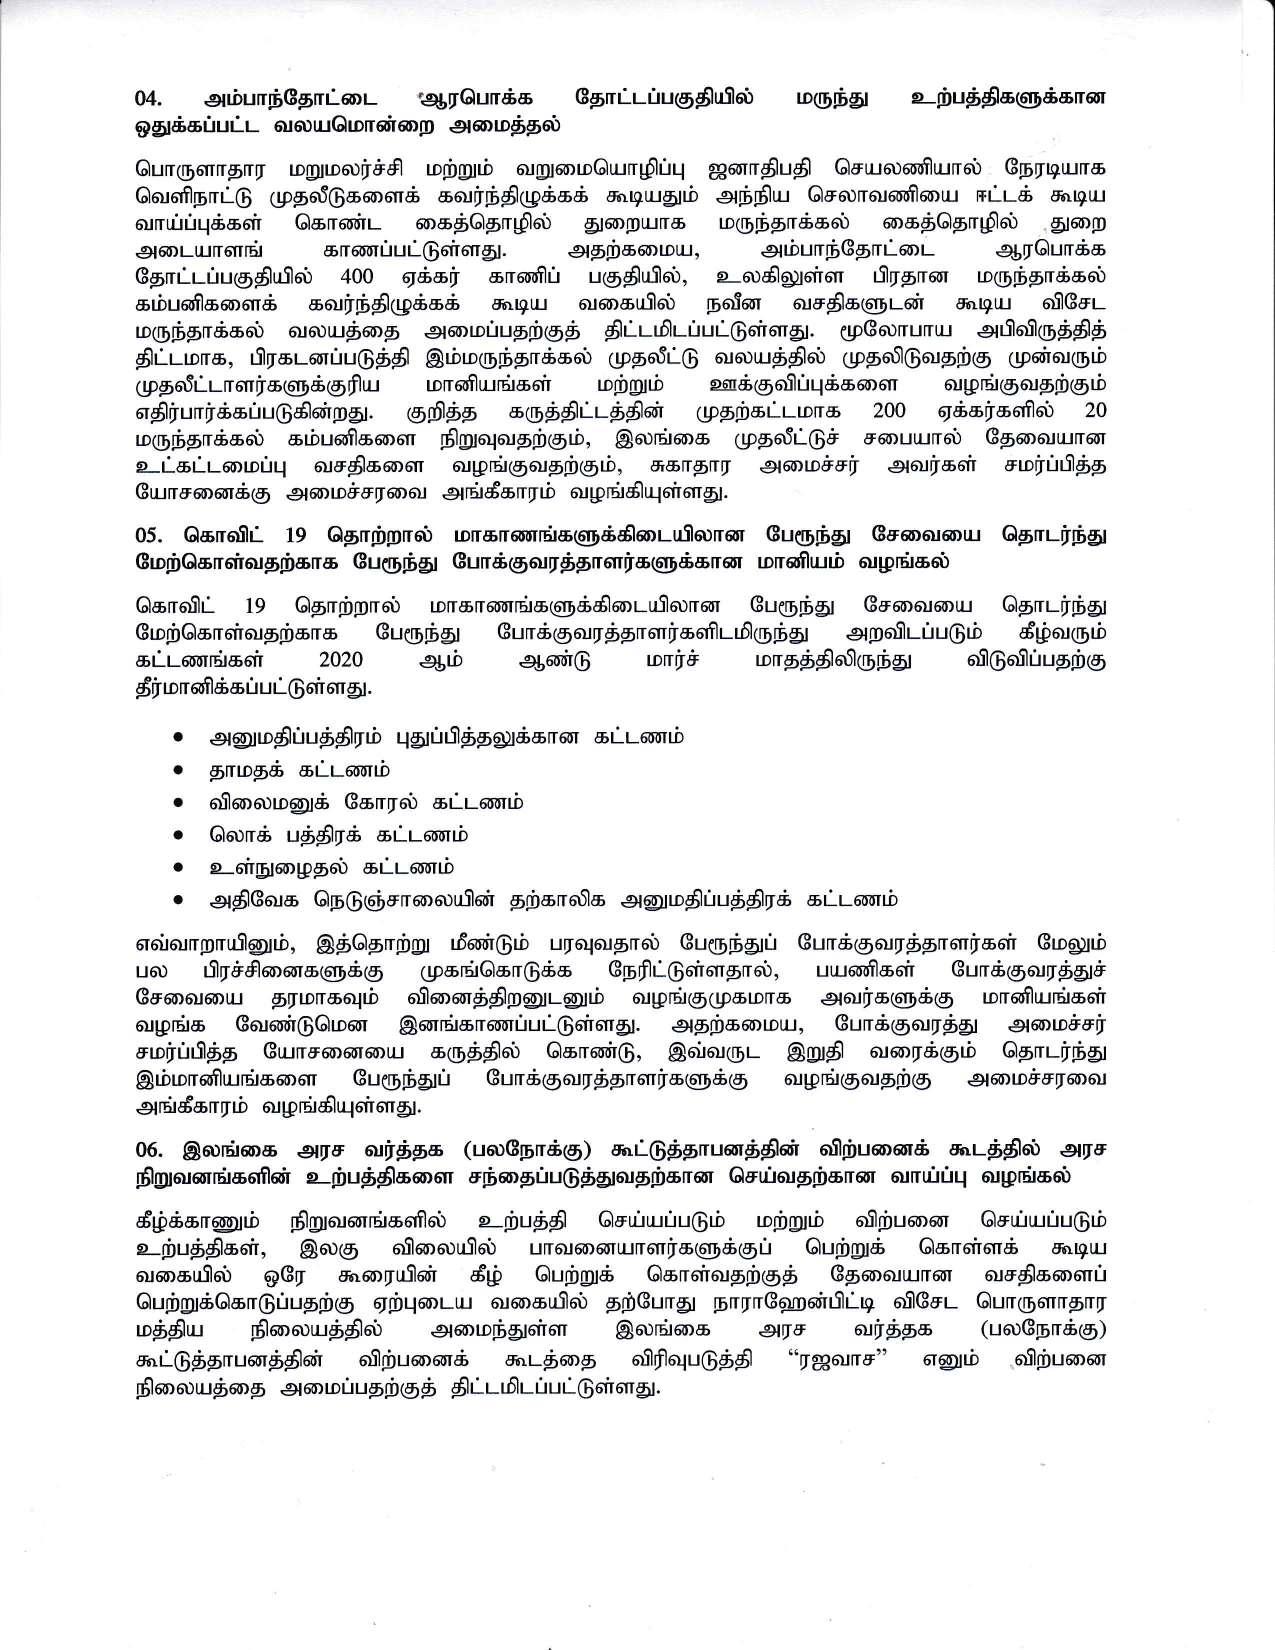 Cabinet Decsion on 09.11.2020 Tamil page 002